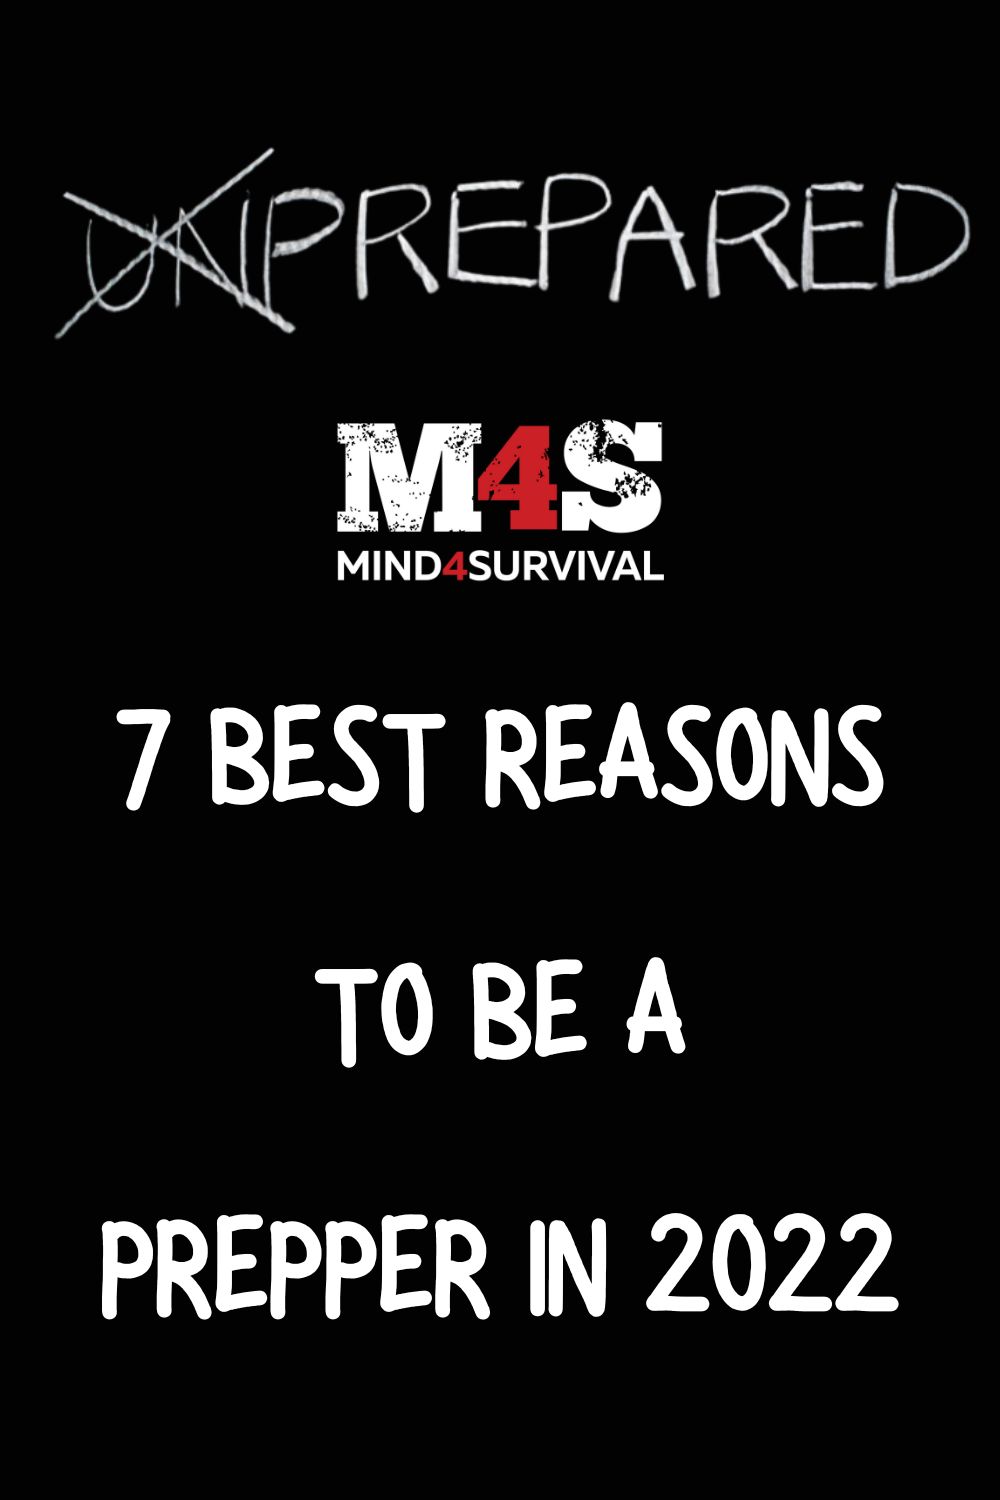 7 Best Reasons - Why be a Prepper in 2023